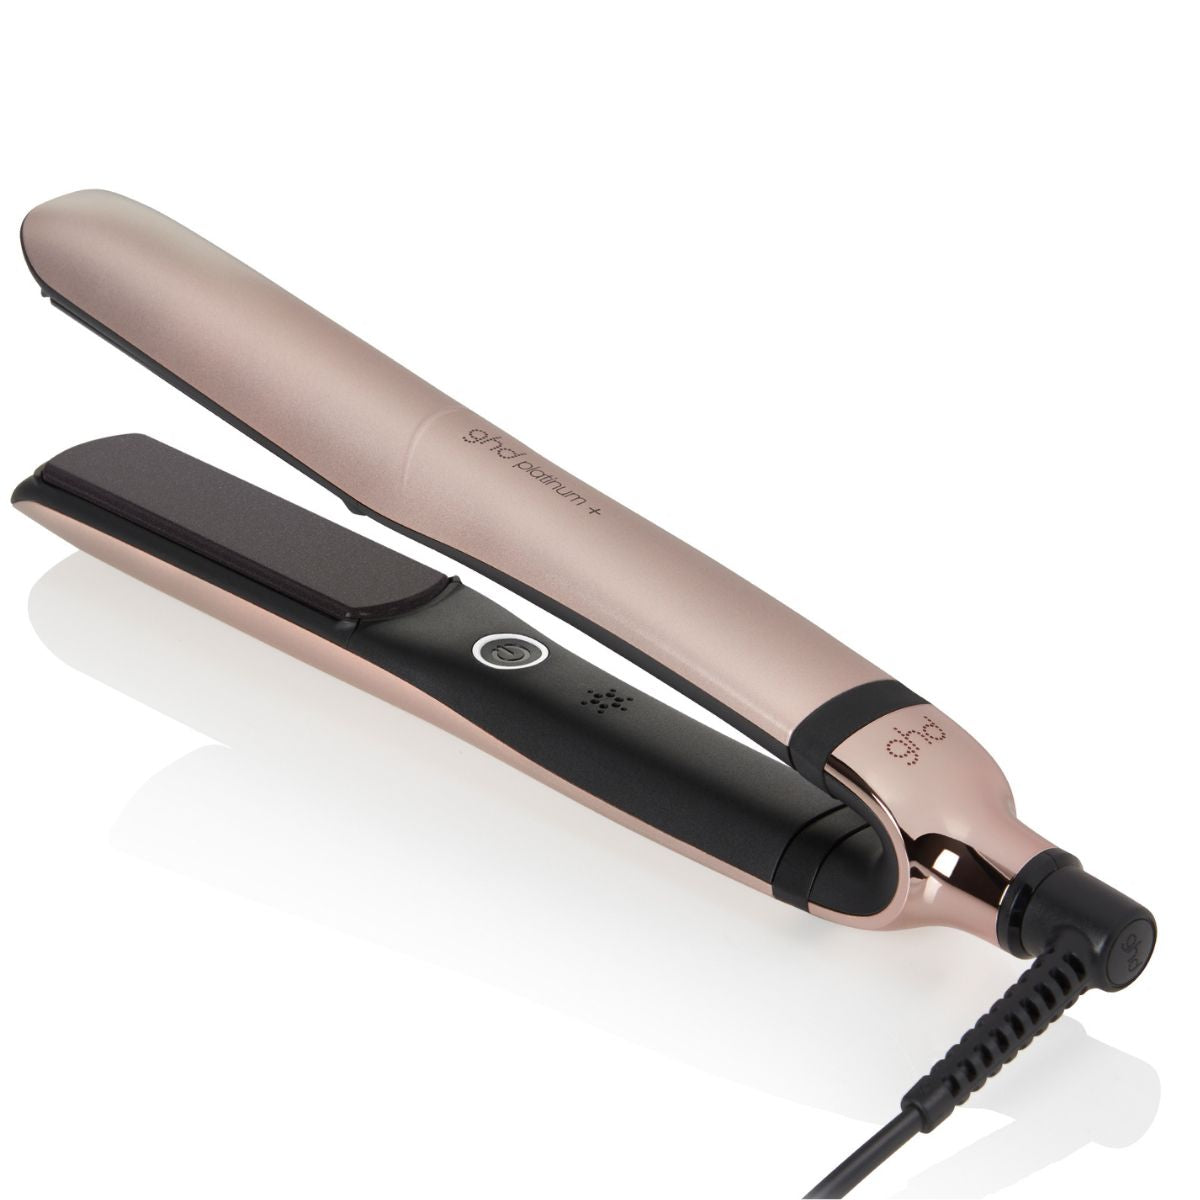 Ghd Platinum+ Styler Limited Edition Hair Straightener in Sun-kissed Taupe